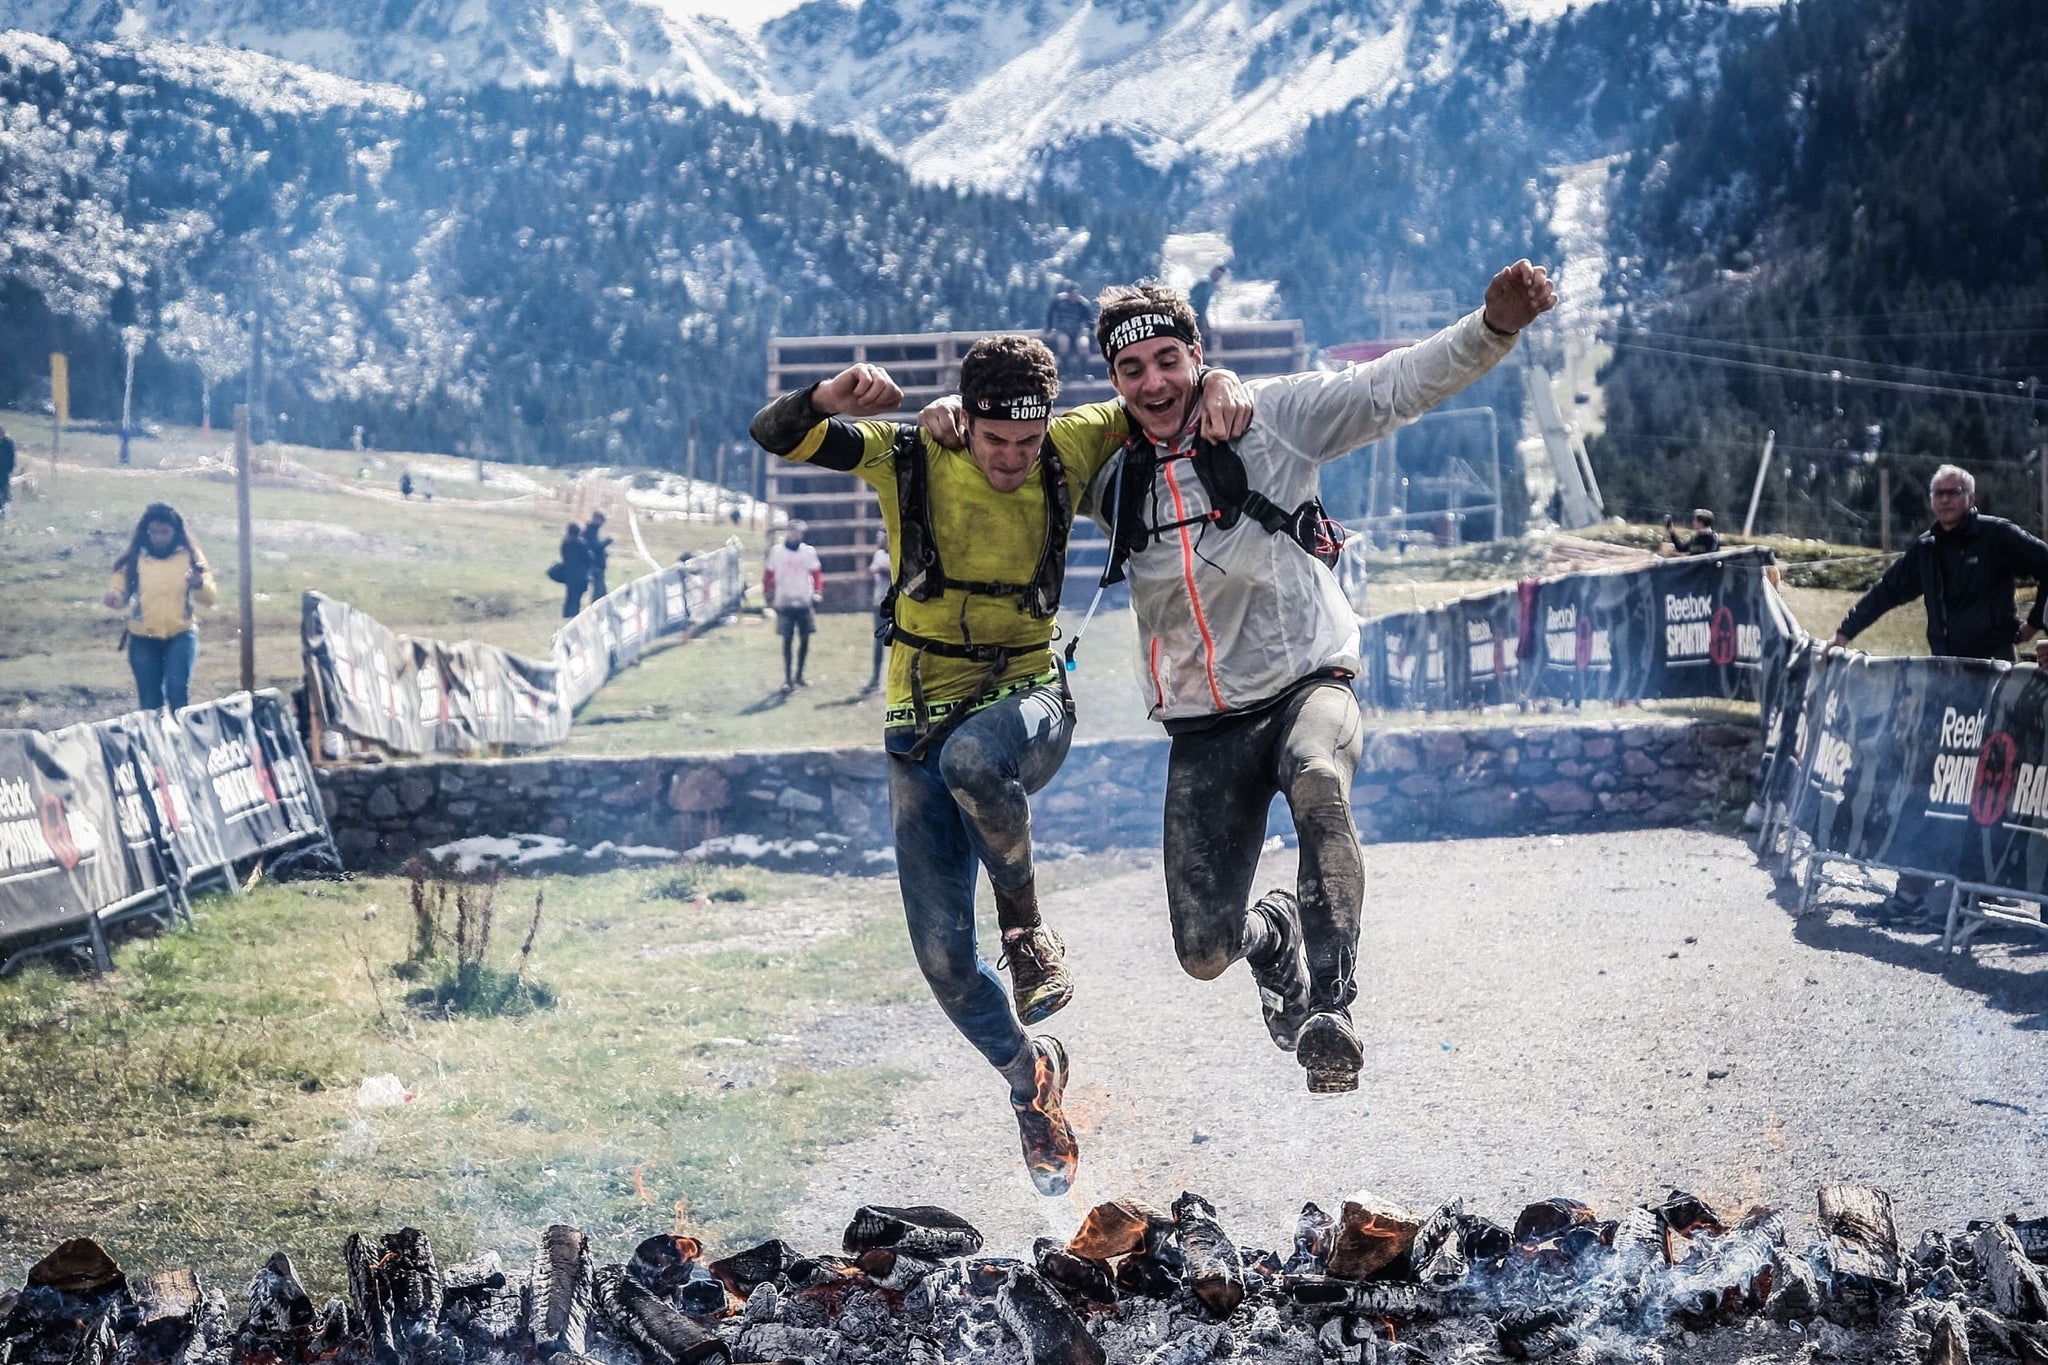 Two spartan racers, who know what the benefits of taking collagen are, jump over a heap of hot coals